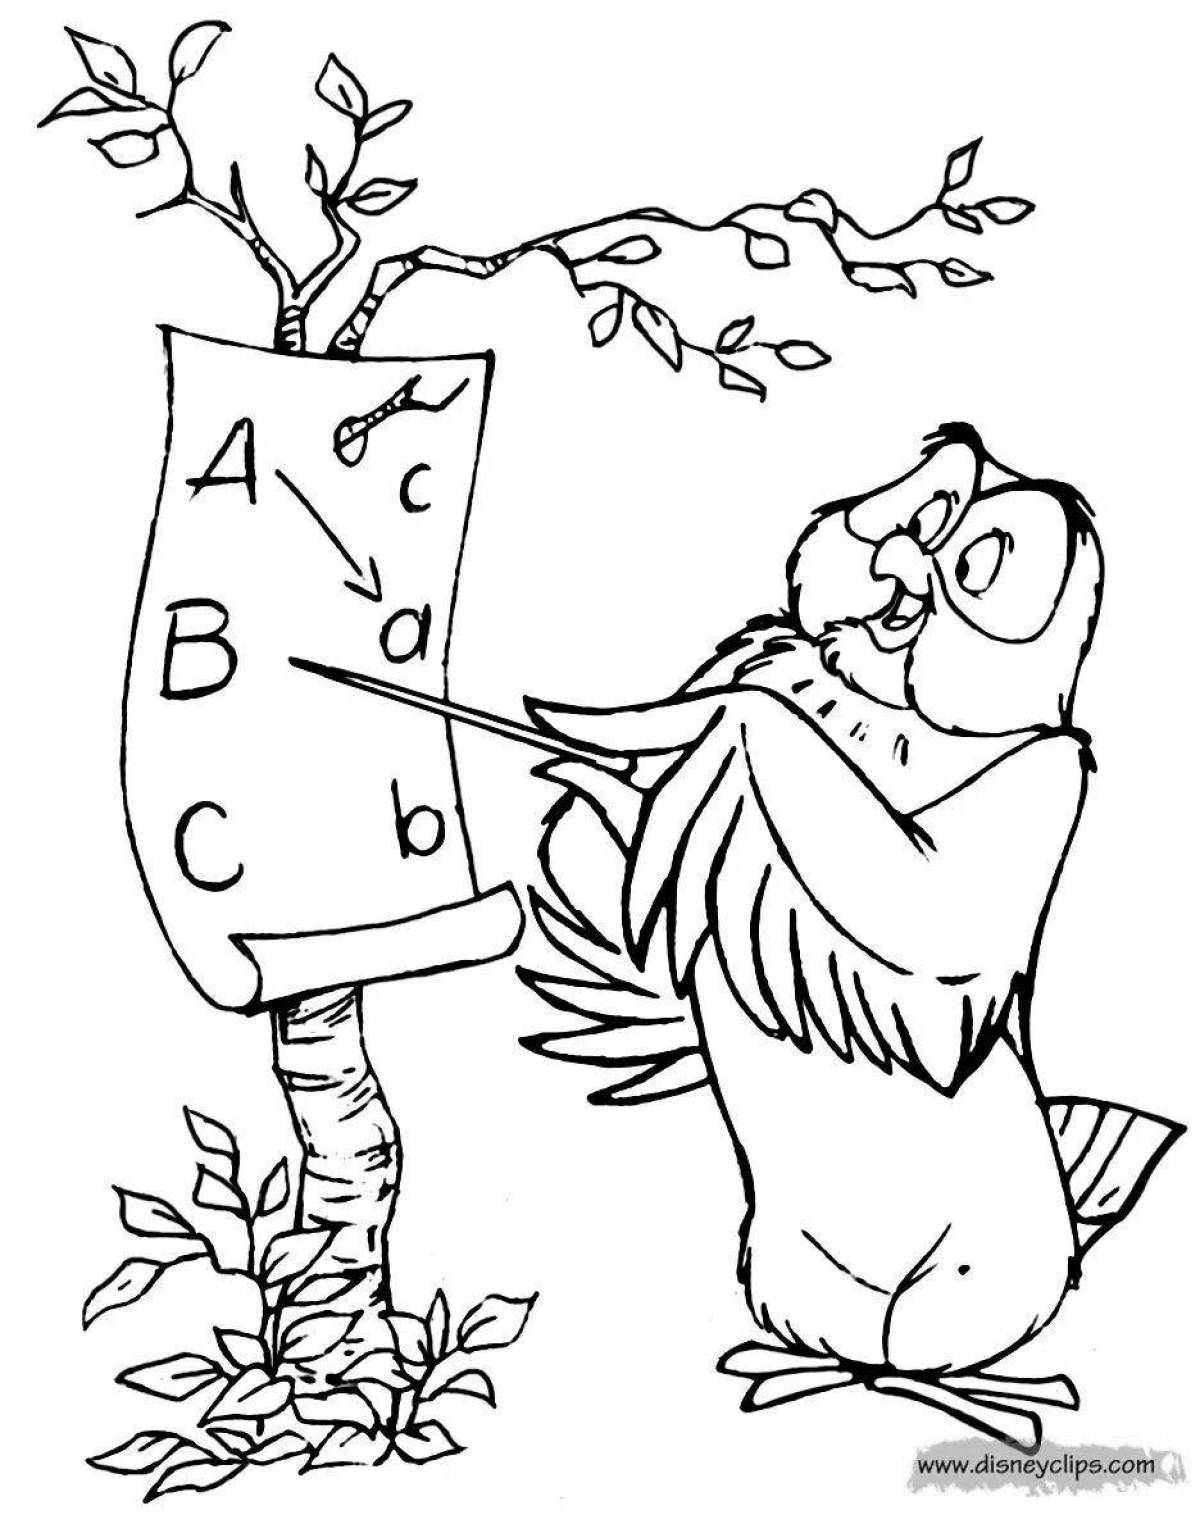 Exquisite winnie the pooh owl coloring book